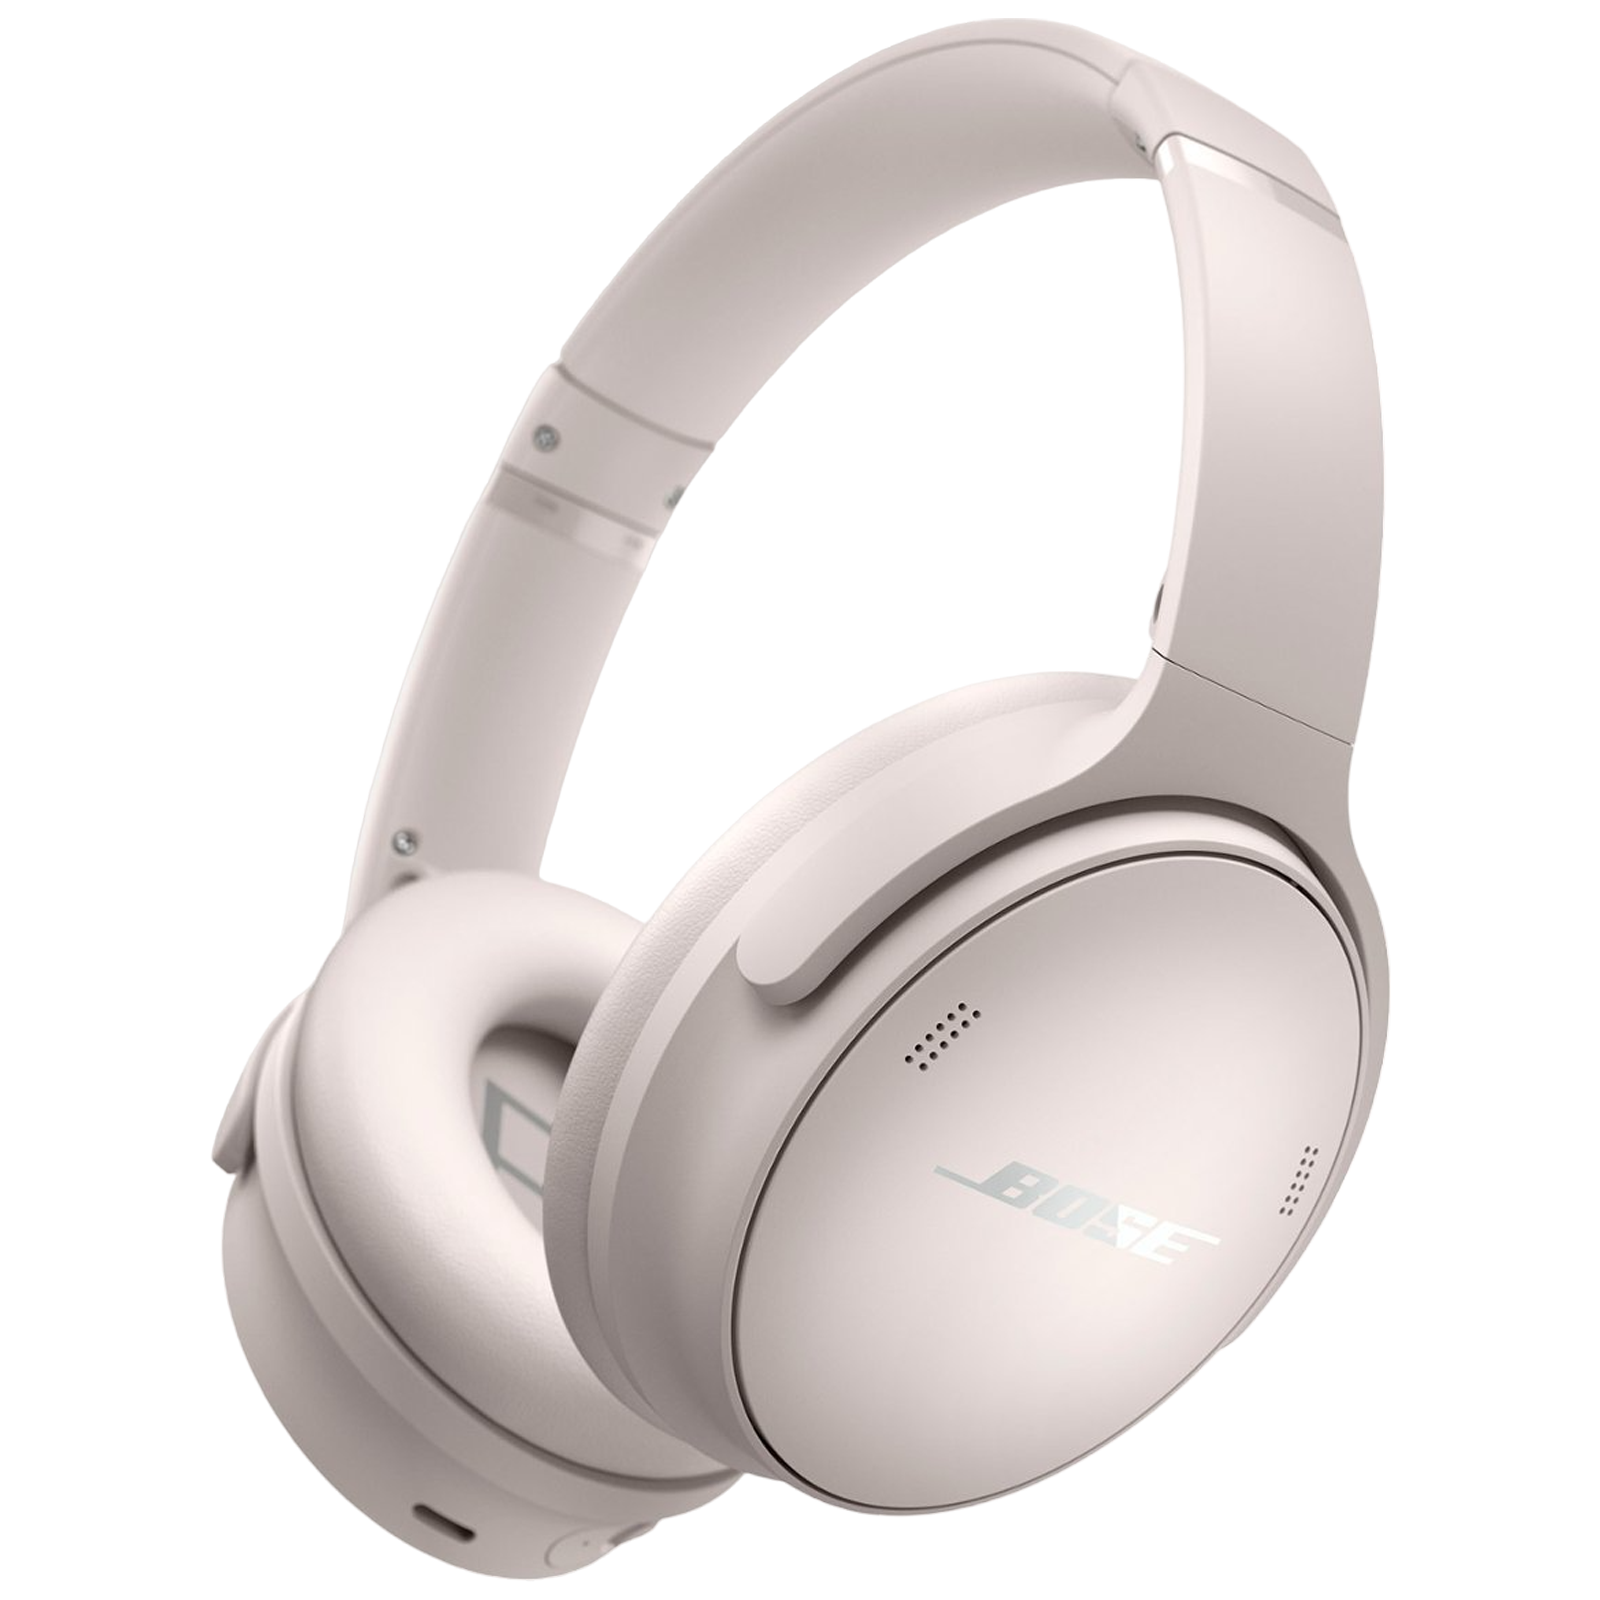 BOSE QuietComfort Bluetooth Headphone with Mic (Upto 24 Hours Playback, Over Ear, White Smoke)